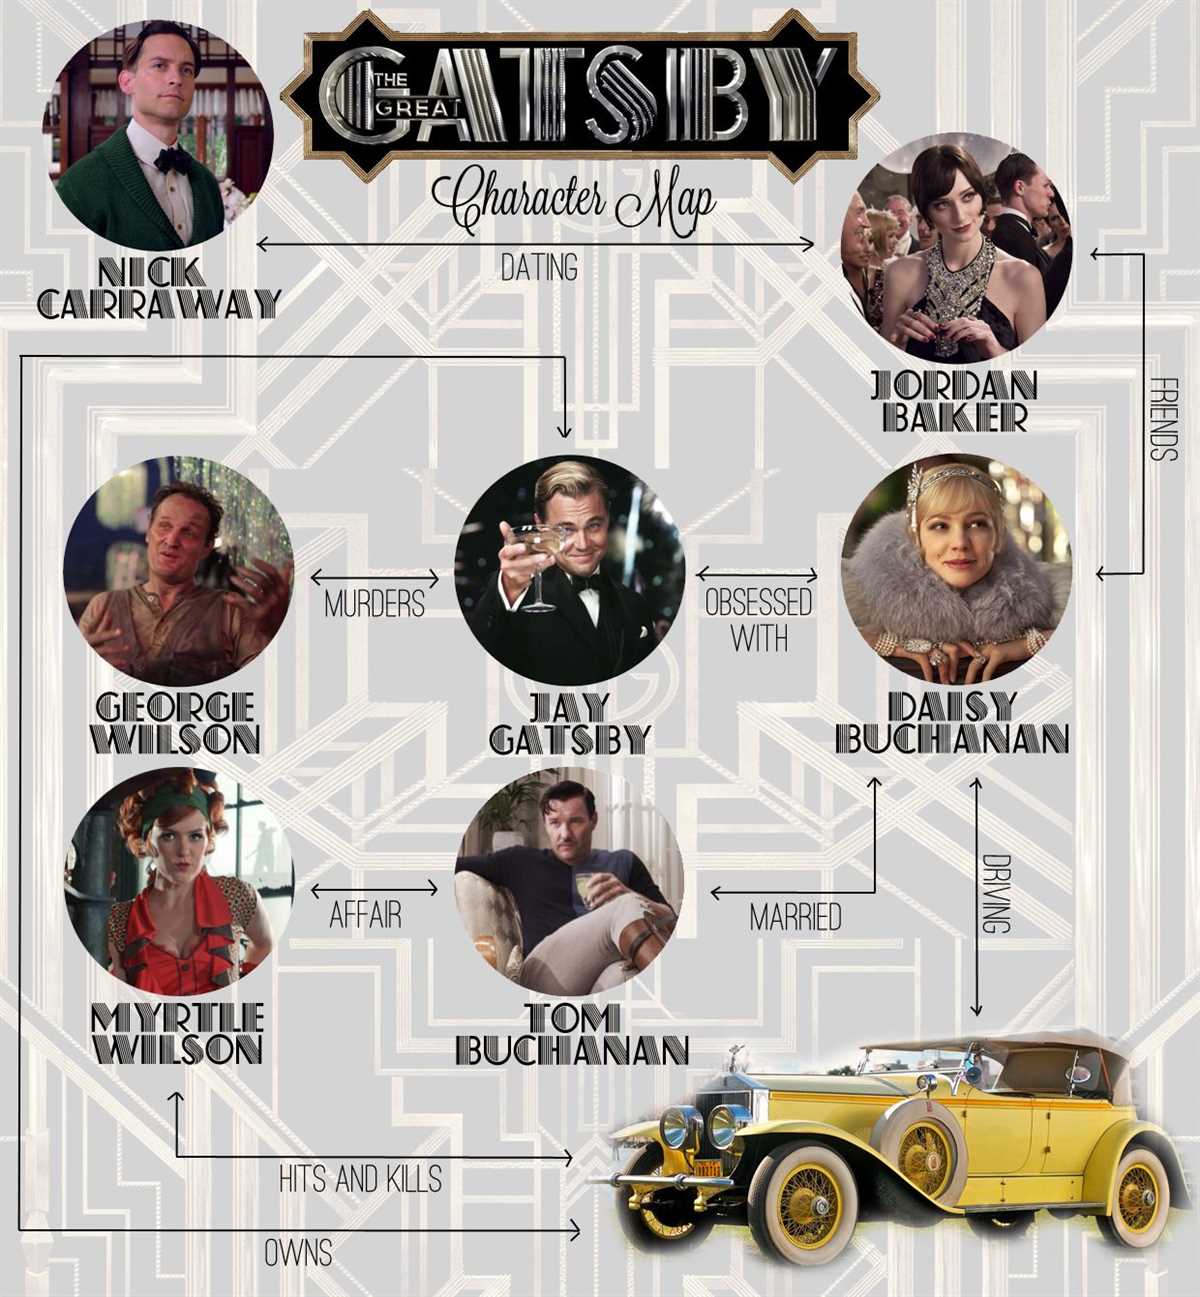 How does the packet enhance understanding of The Great Gatsby?